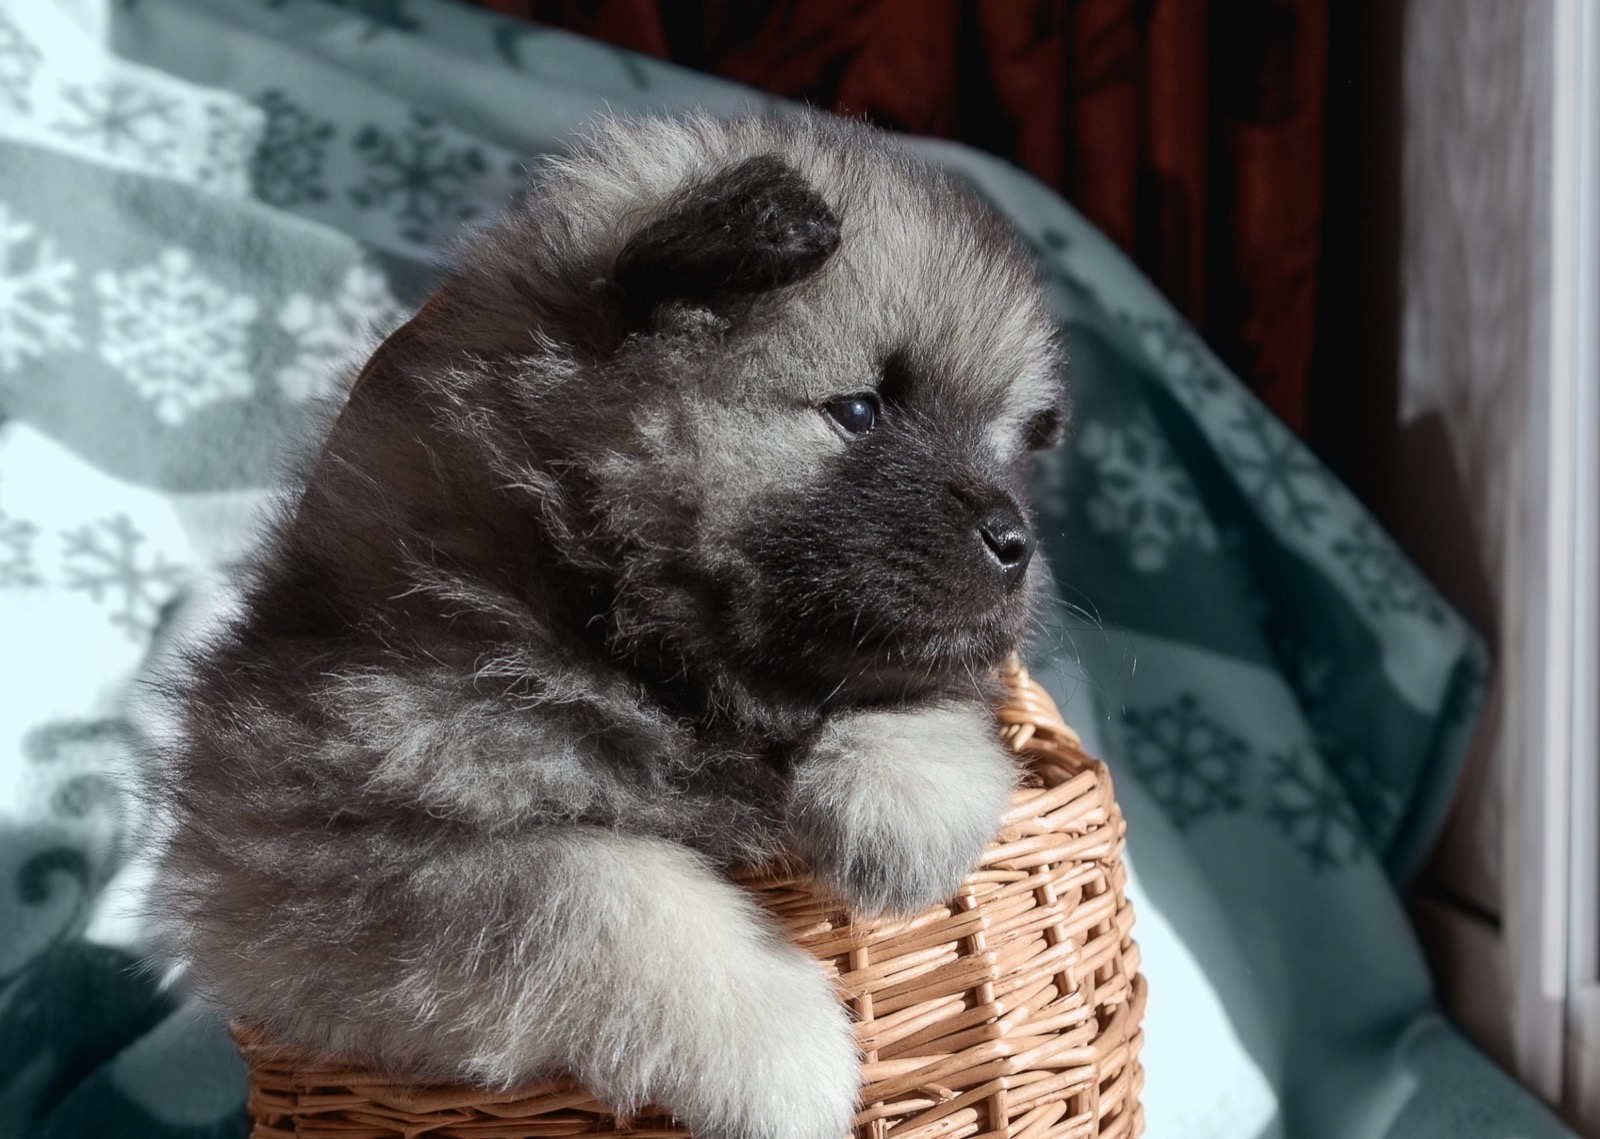 Dog Personality Quiz 🐶: What Wild Animal Are You? 🦁 Keeshond